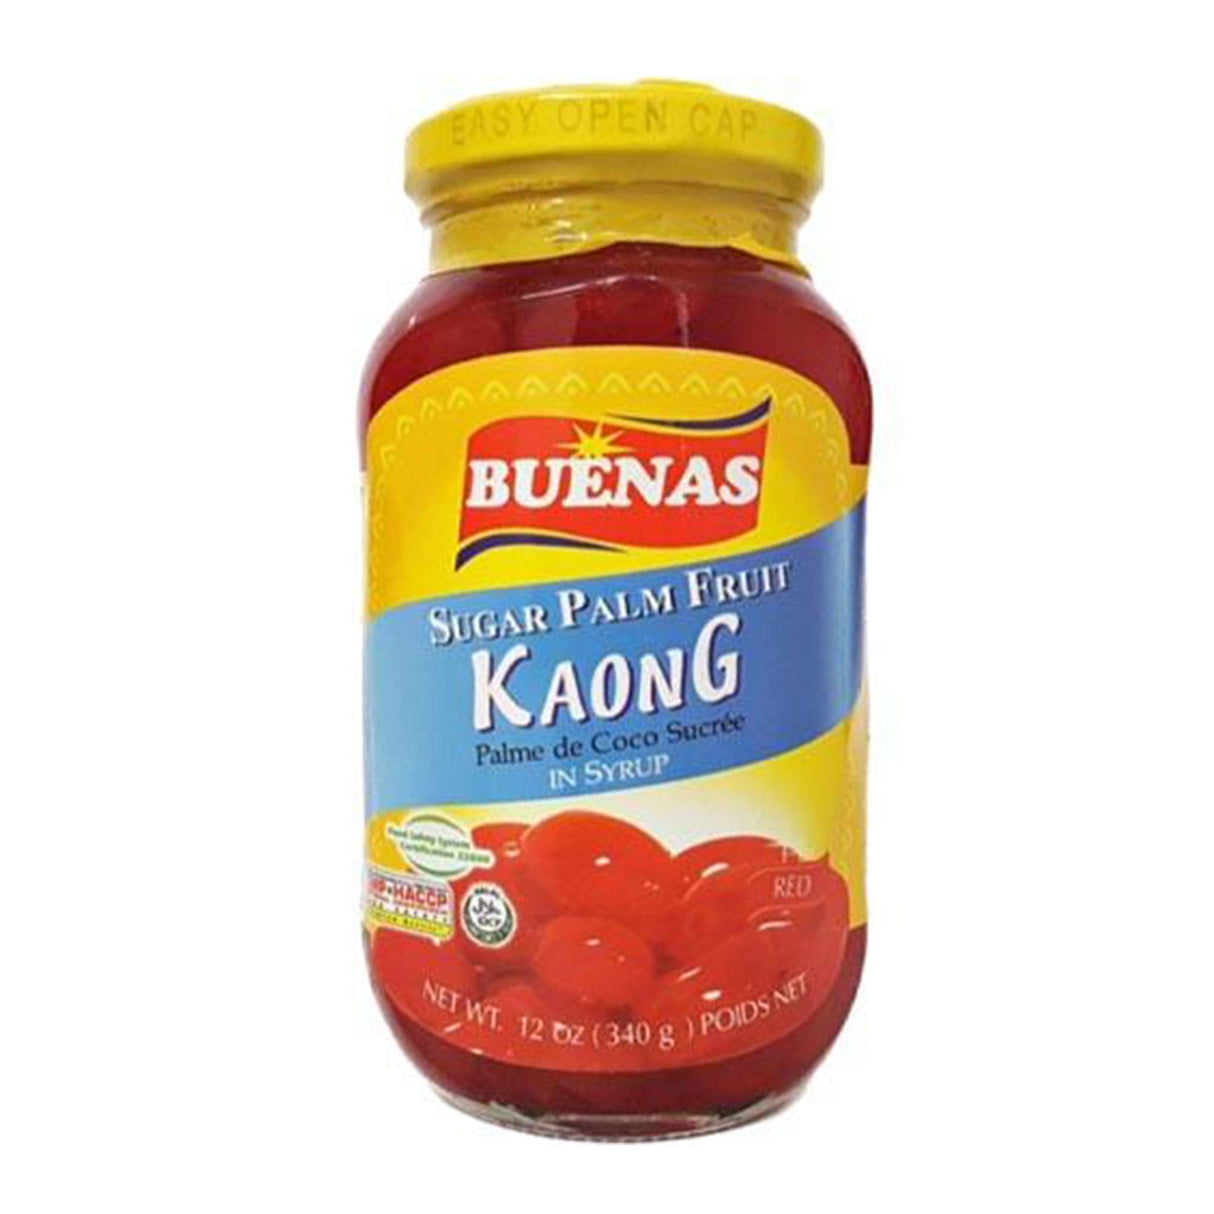 Buenas Sugar Palm Fruit Kaong in Syrup (Red)